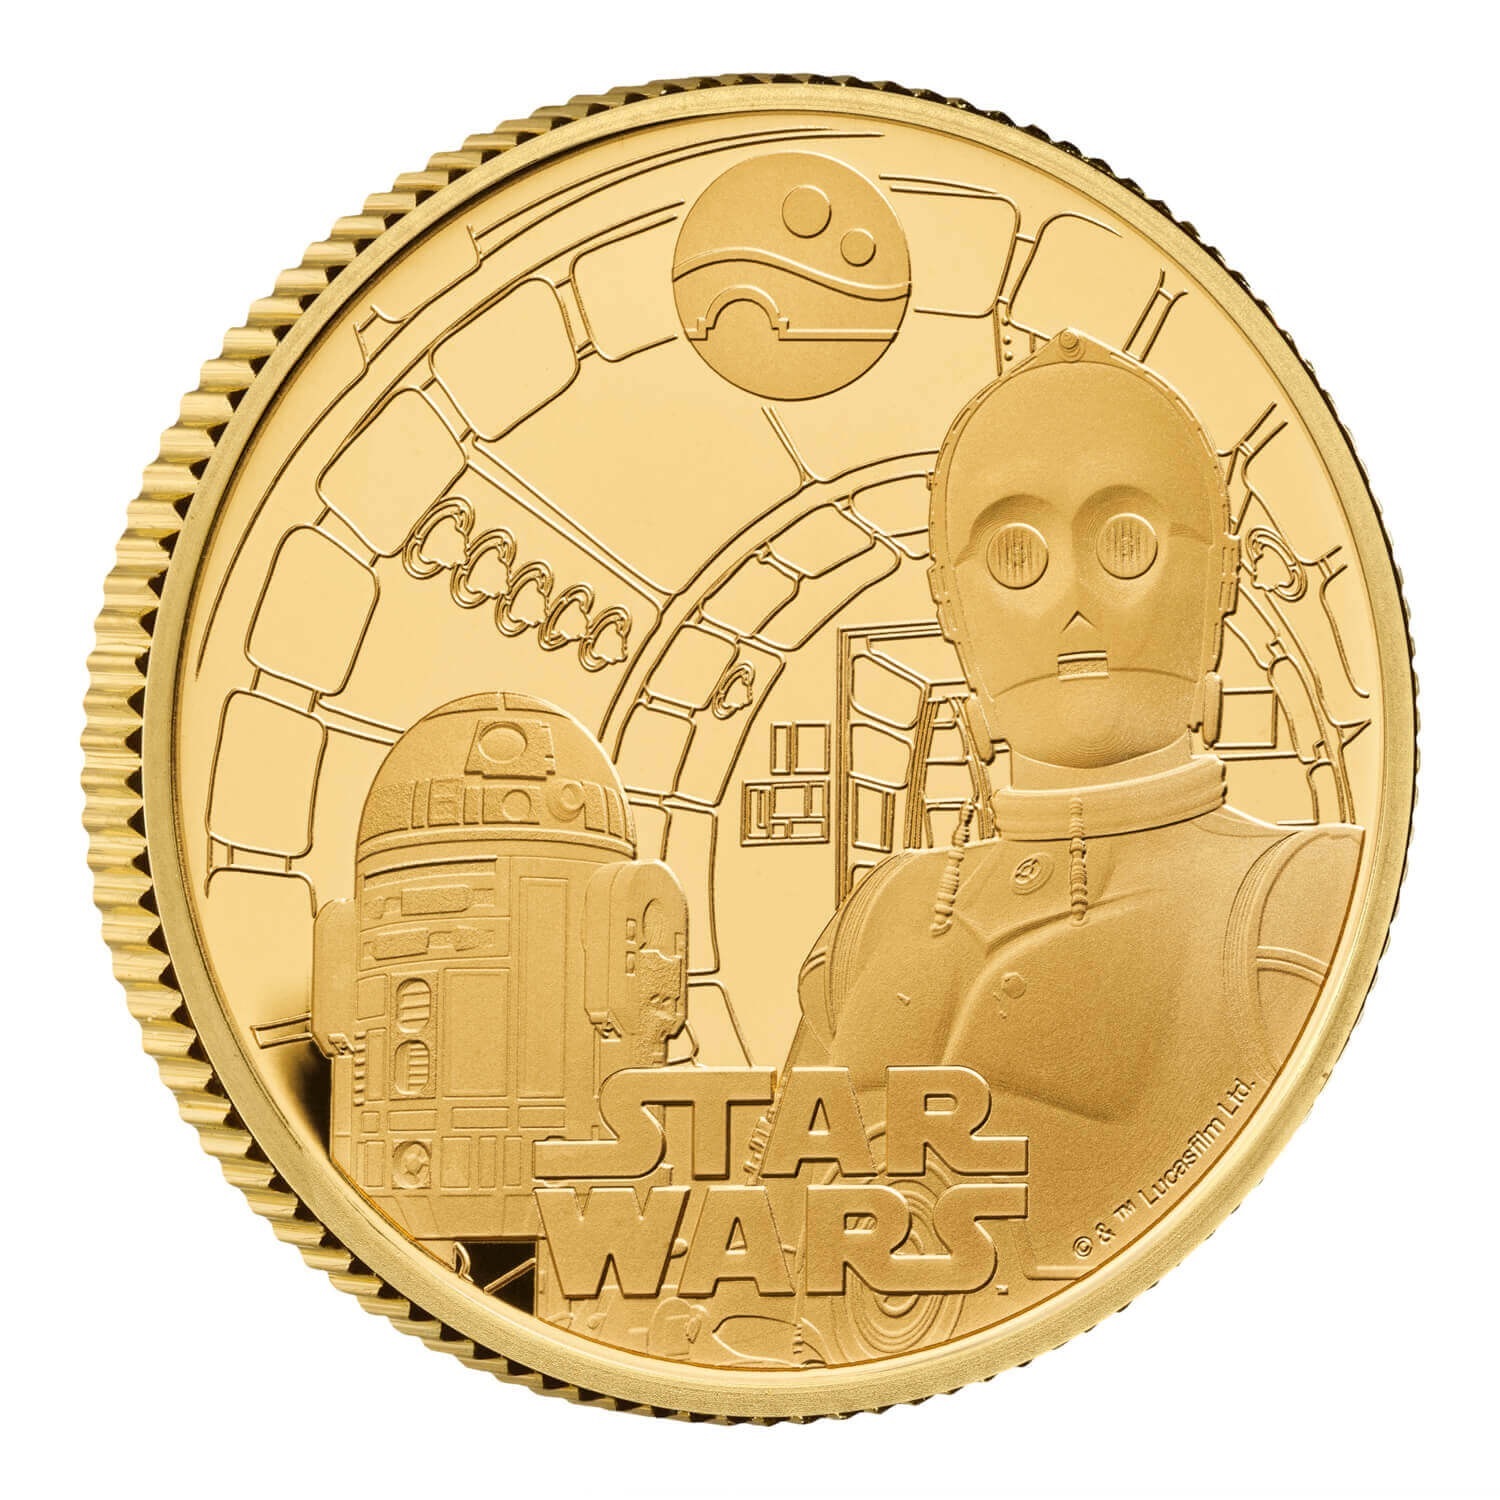 (W185.25.P.2023.UK23R2GQ) 25 Pounds United Kingdom 2023 quarter oz Proof gold - Star Wars (R2-D2 and C3PO) Reverse (zoom)